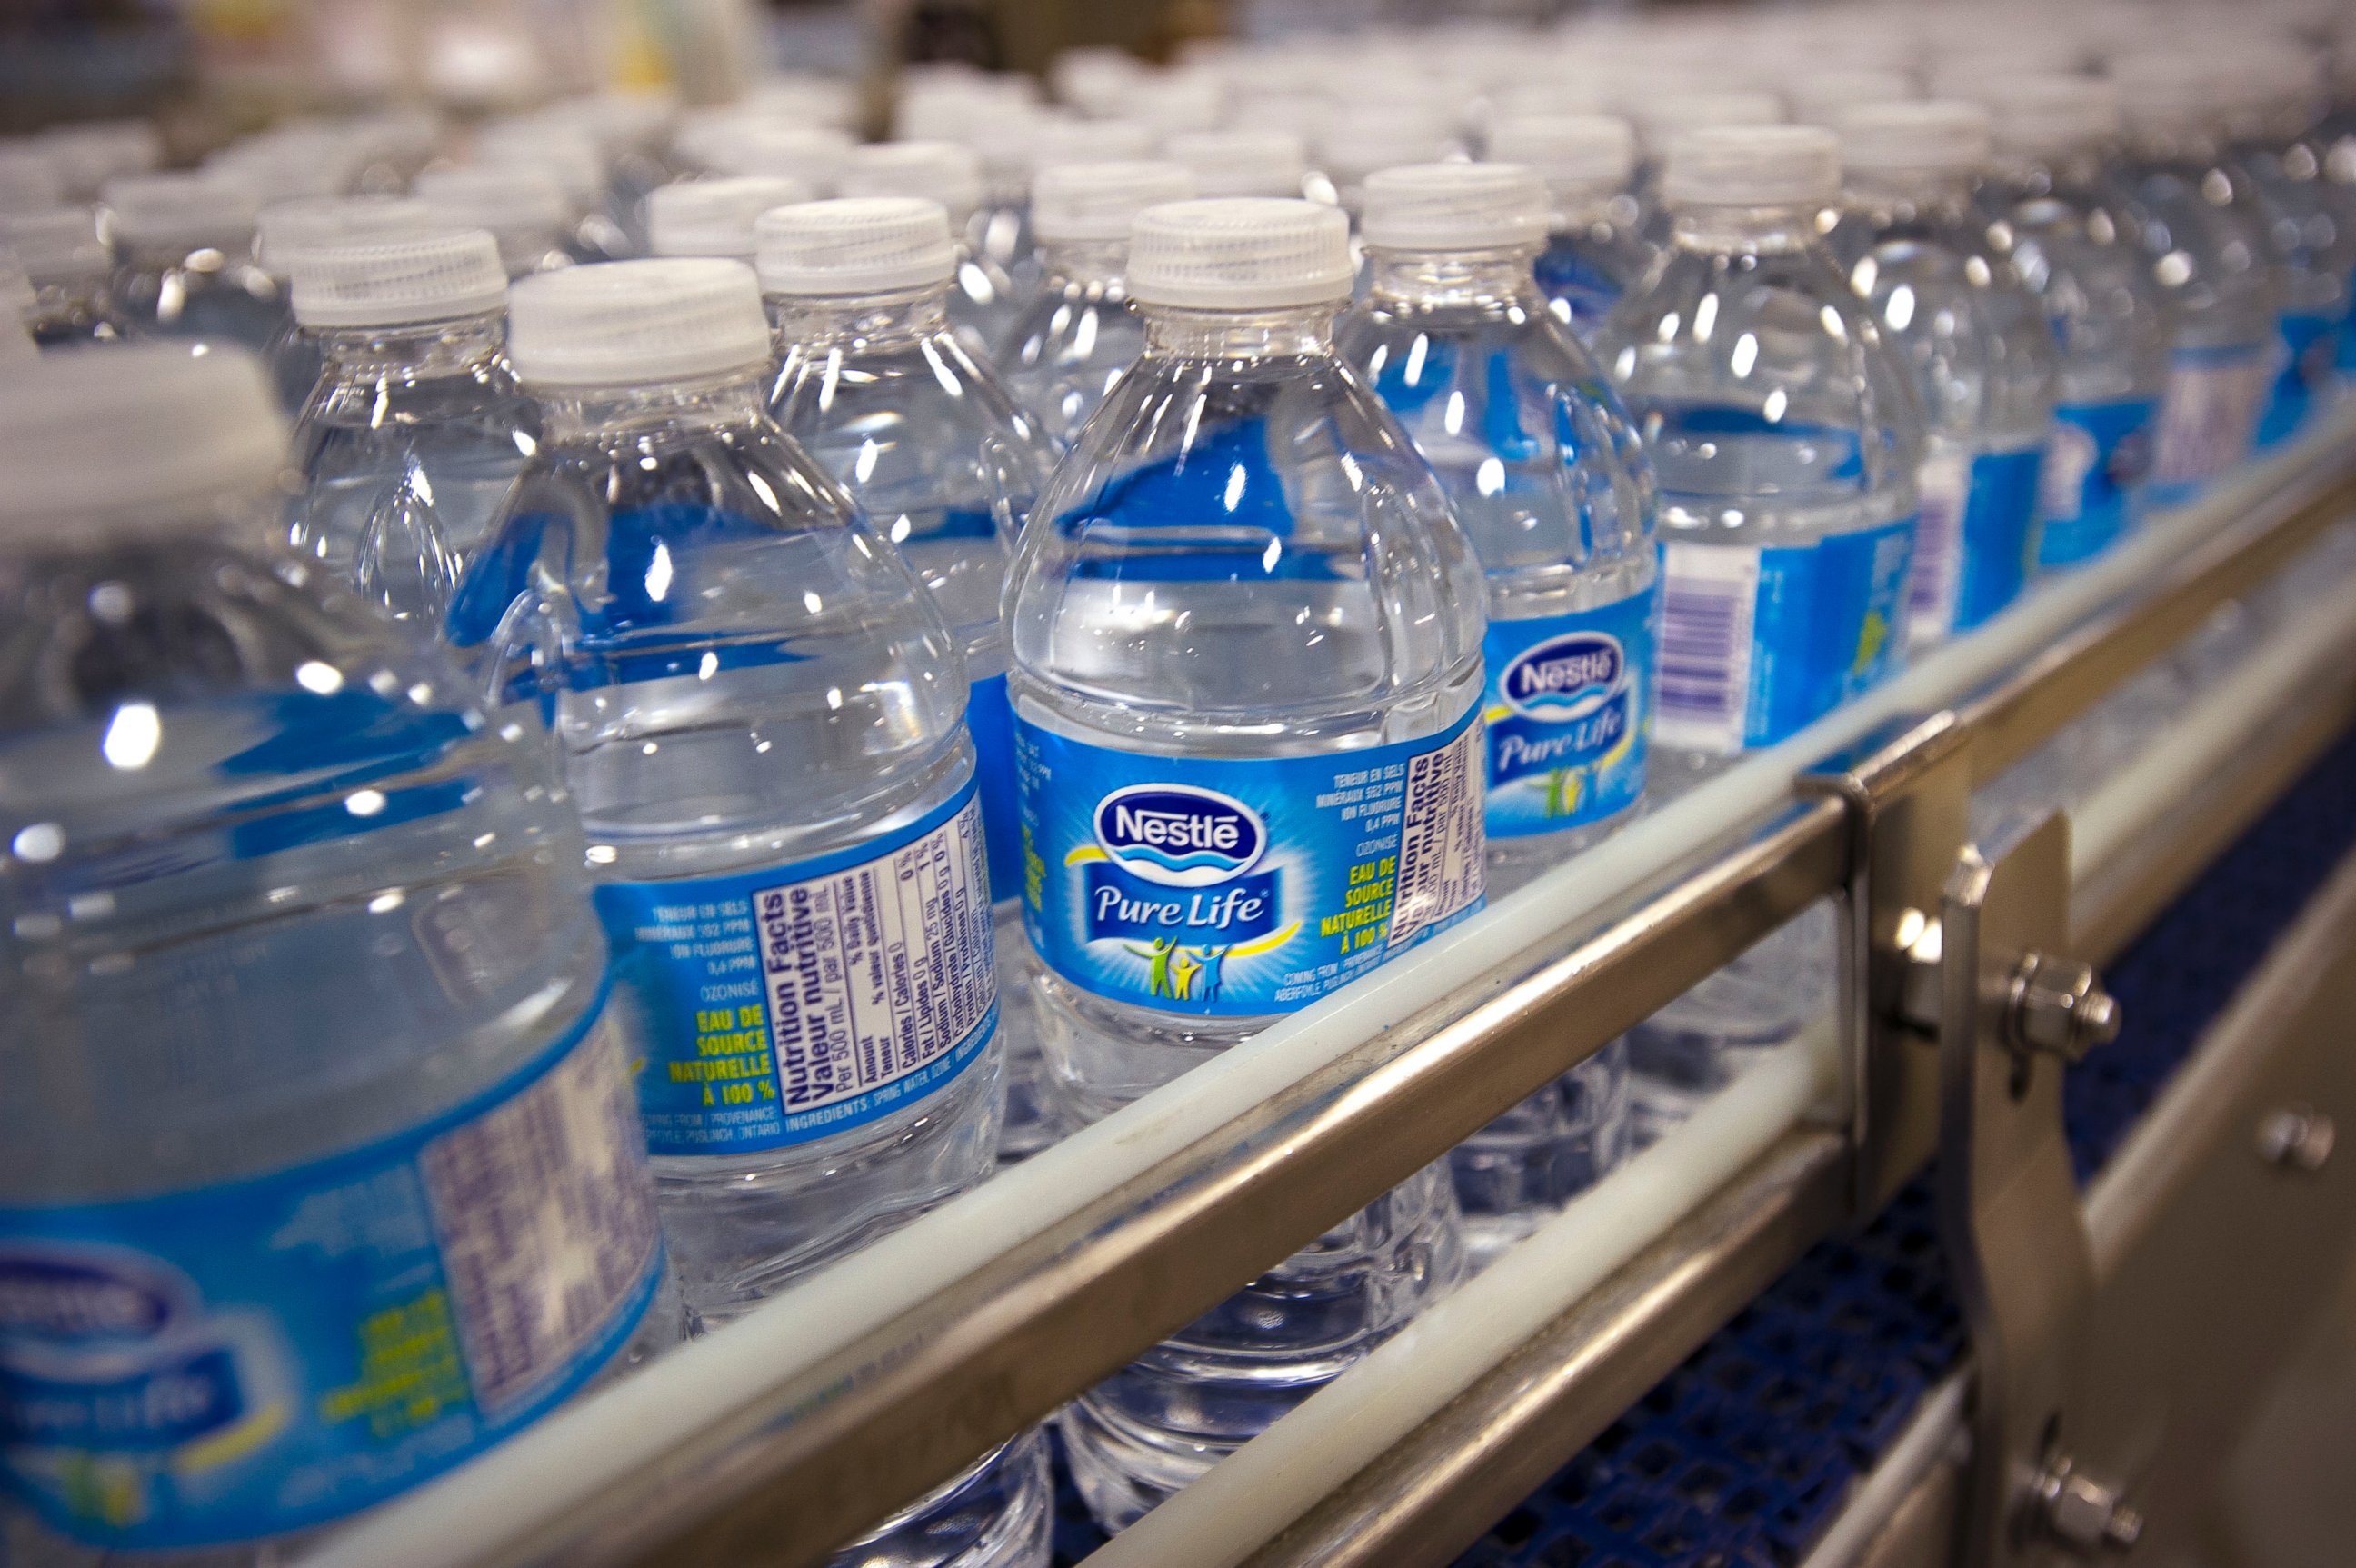 PHOTO: Bottles of Pure Life brand water are pictured on the production line at the Nestle Waters Canada plant near Guelph, Ontario, Canada on Jan. 16, 2015.